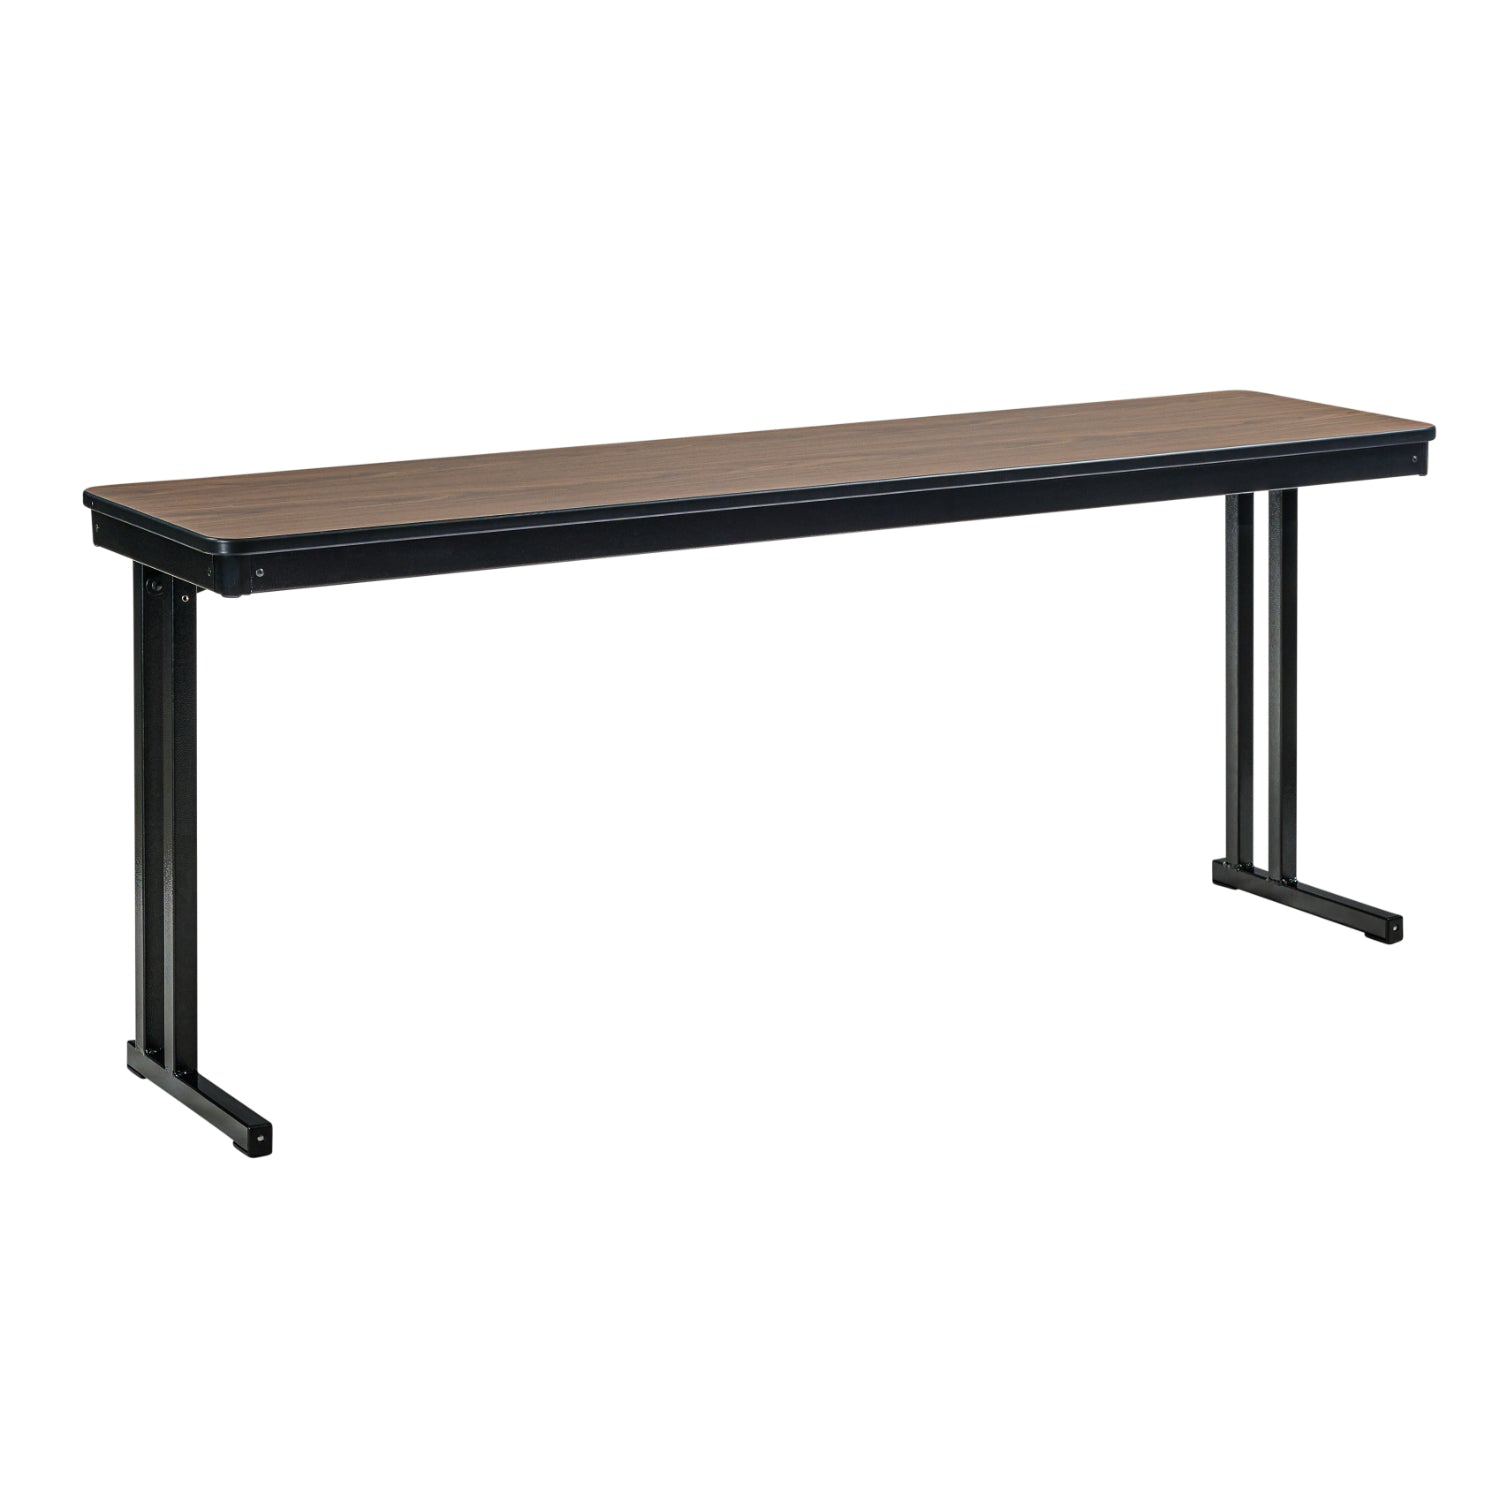 Max Seating Folding Training and Seminar Table with Cantilever Legs, 18" x 84", High Pressure Laminate Top with Plywood Core/T-Mold Edge